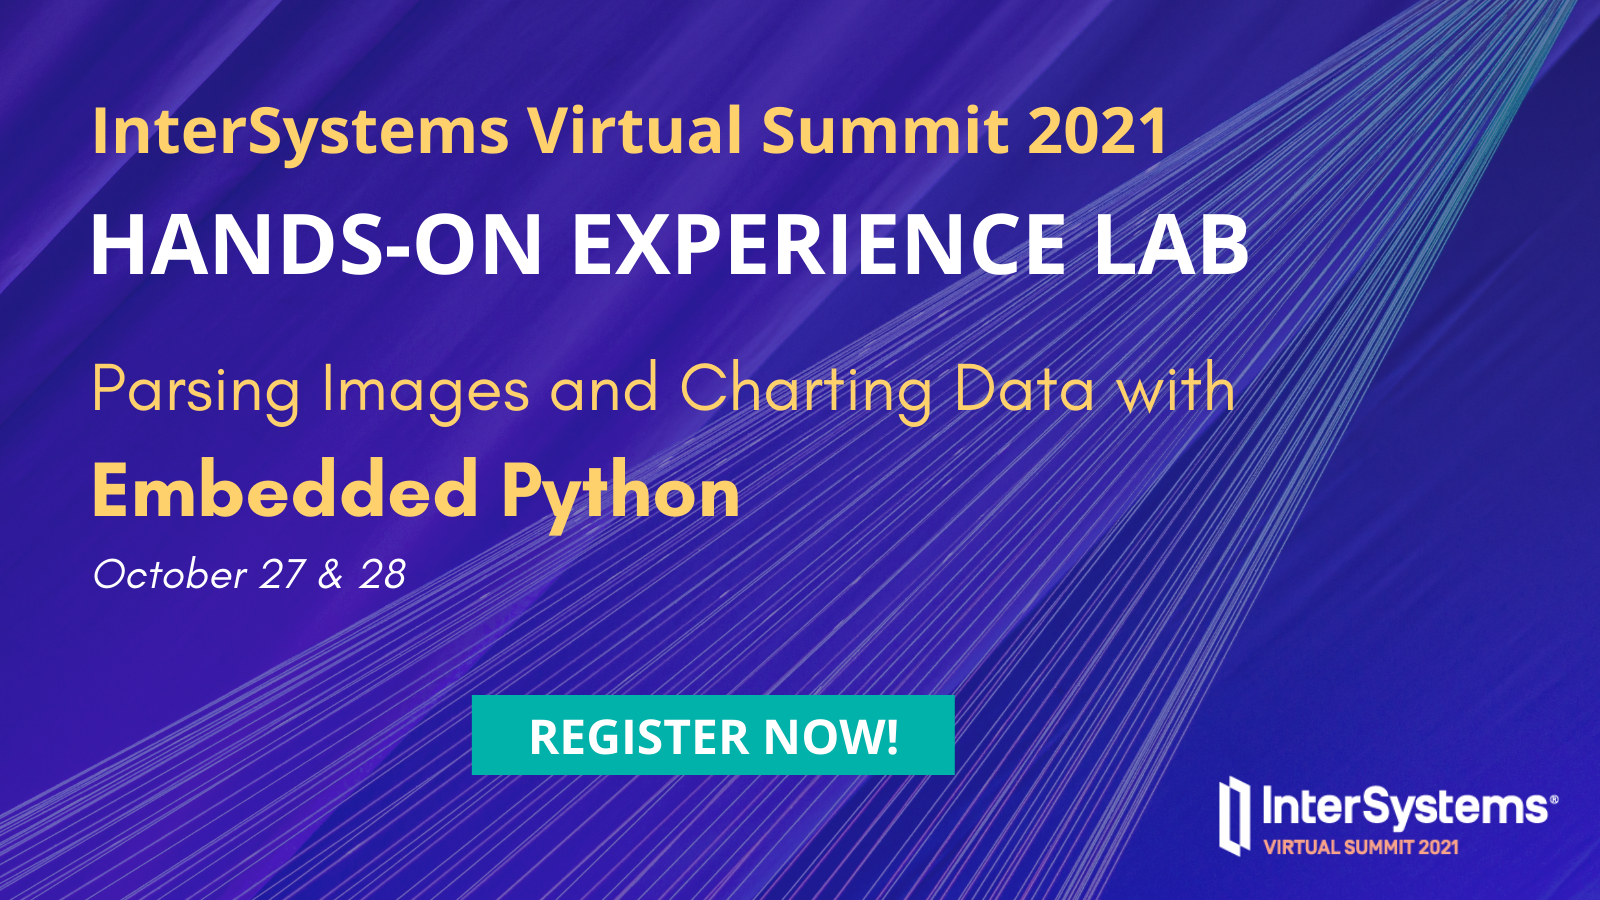 Hands-On Experience Lab: Parsing Images and Charting Data with Embedded Python, Oct. 27&28